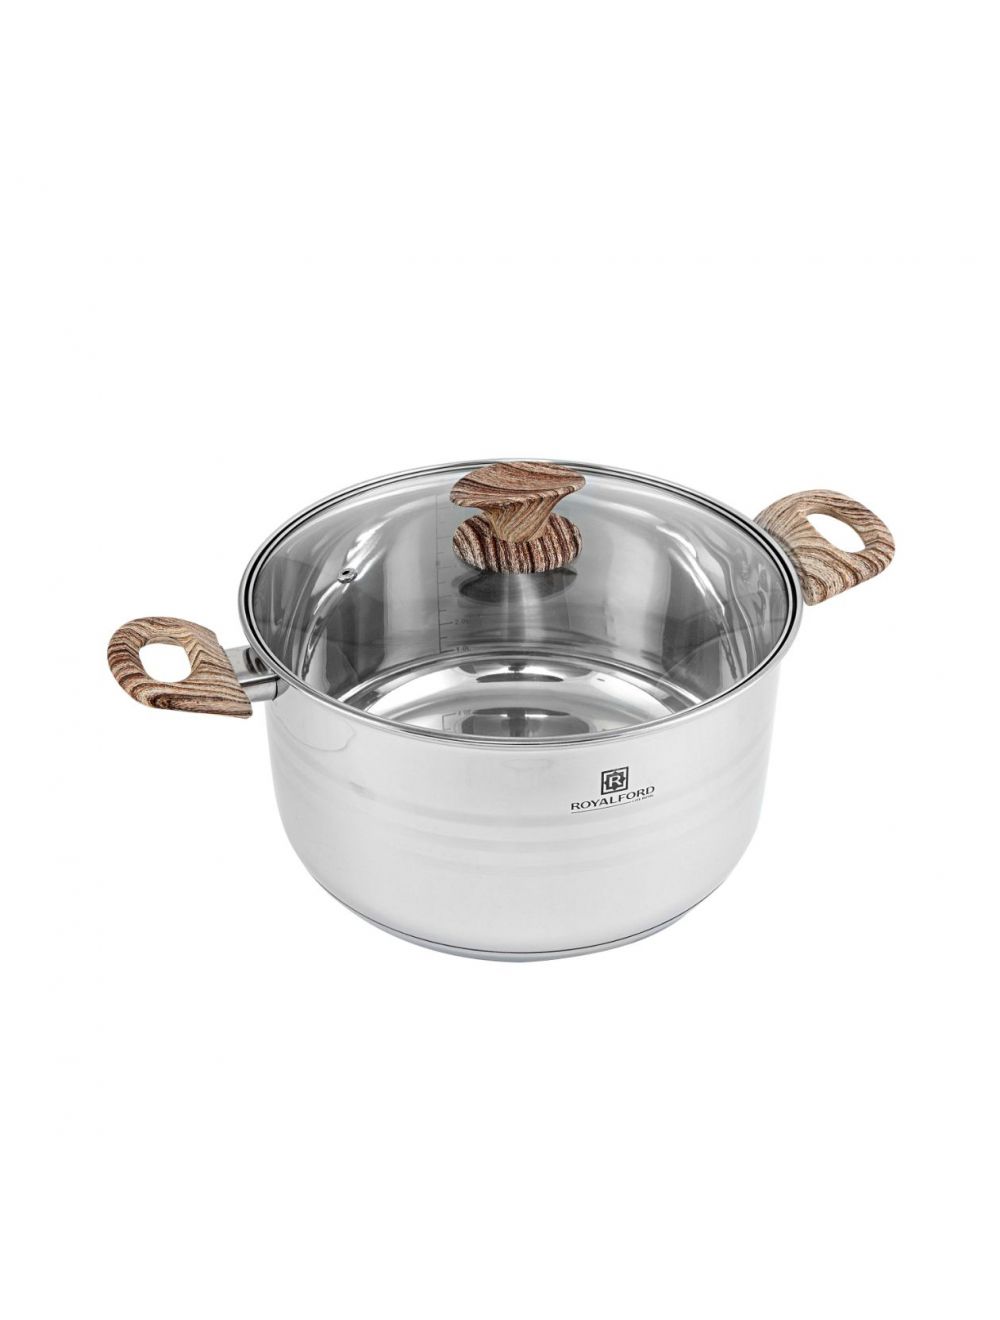 Royalford RF8547 22cm Stainless Steel Casserole with Glass Lid